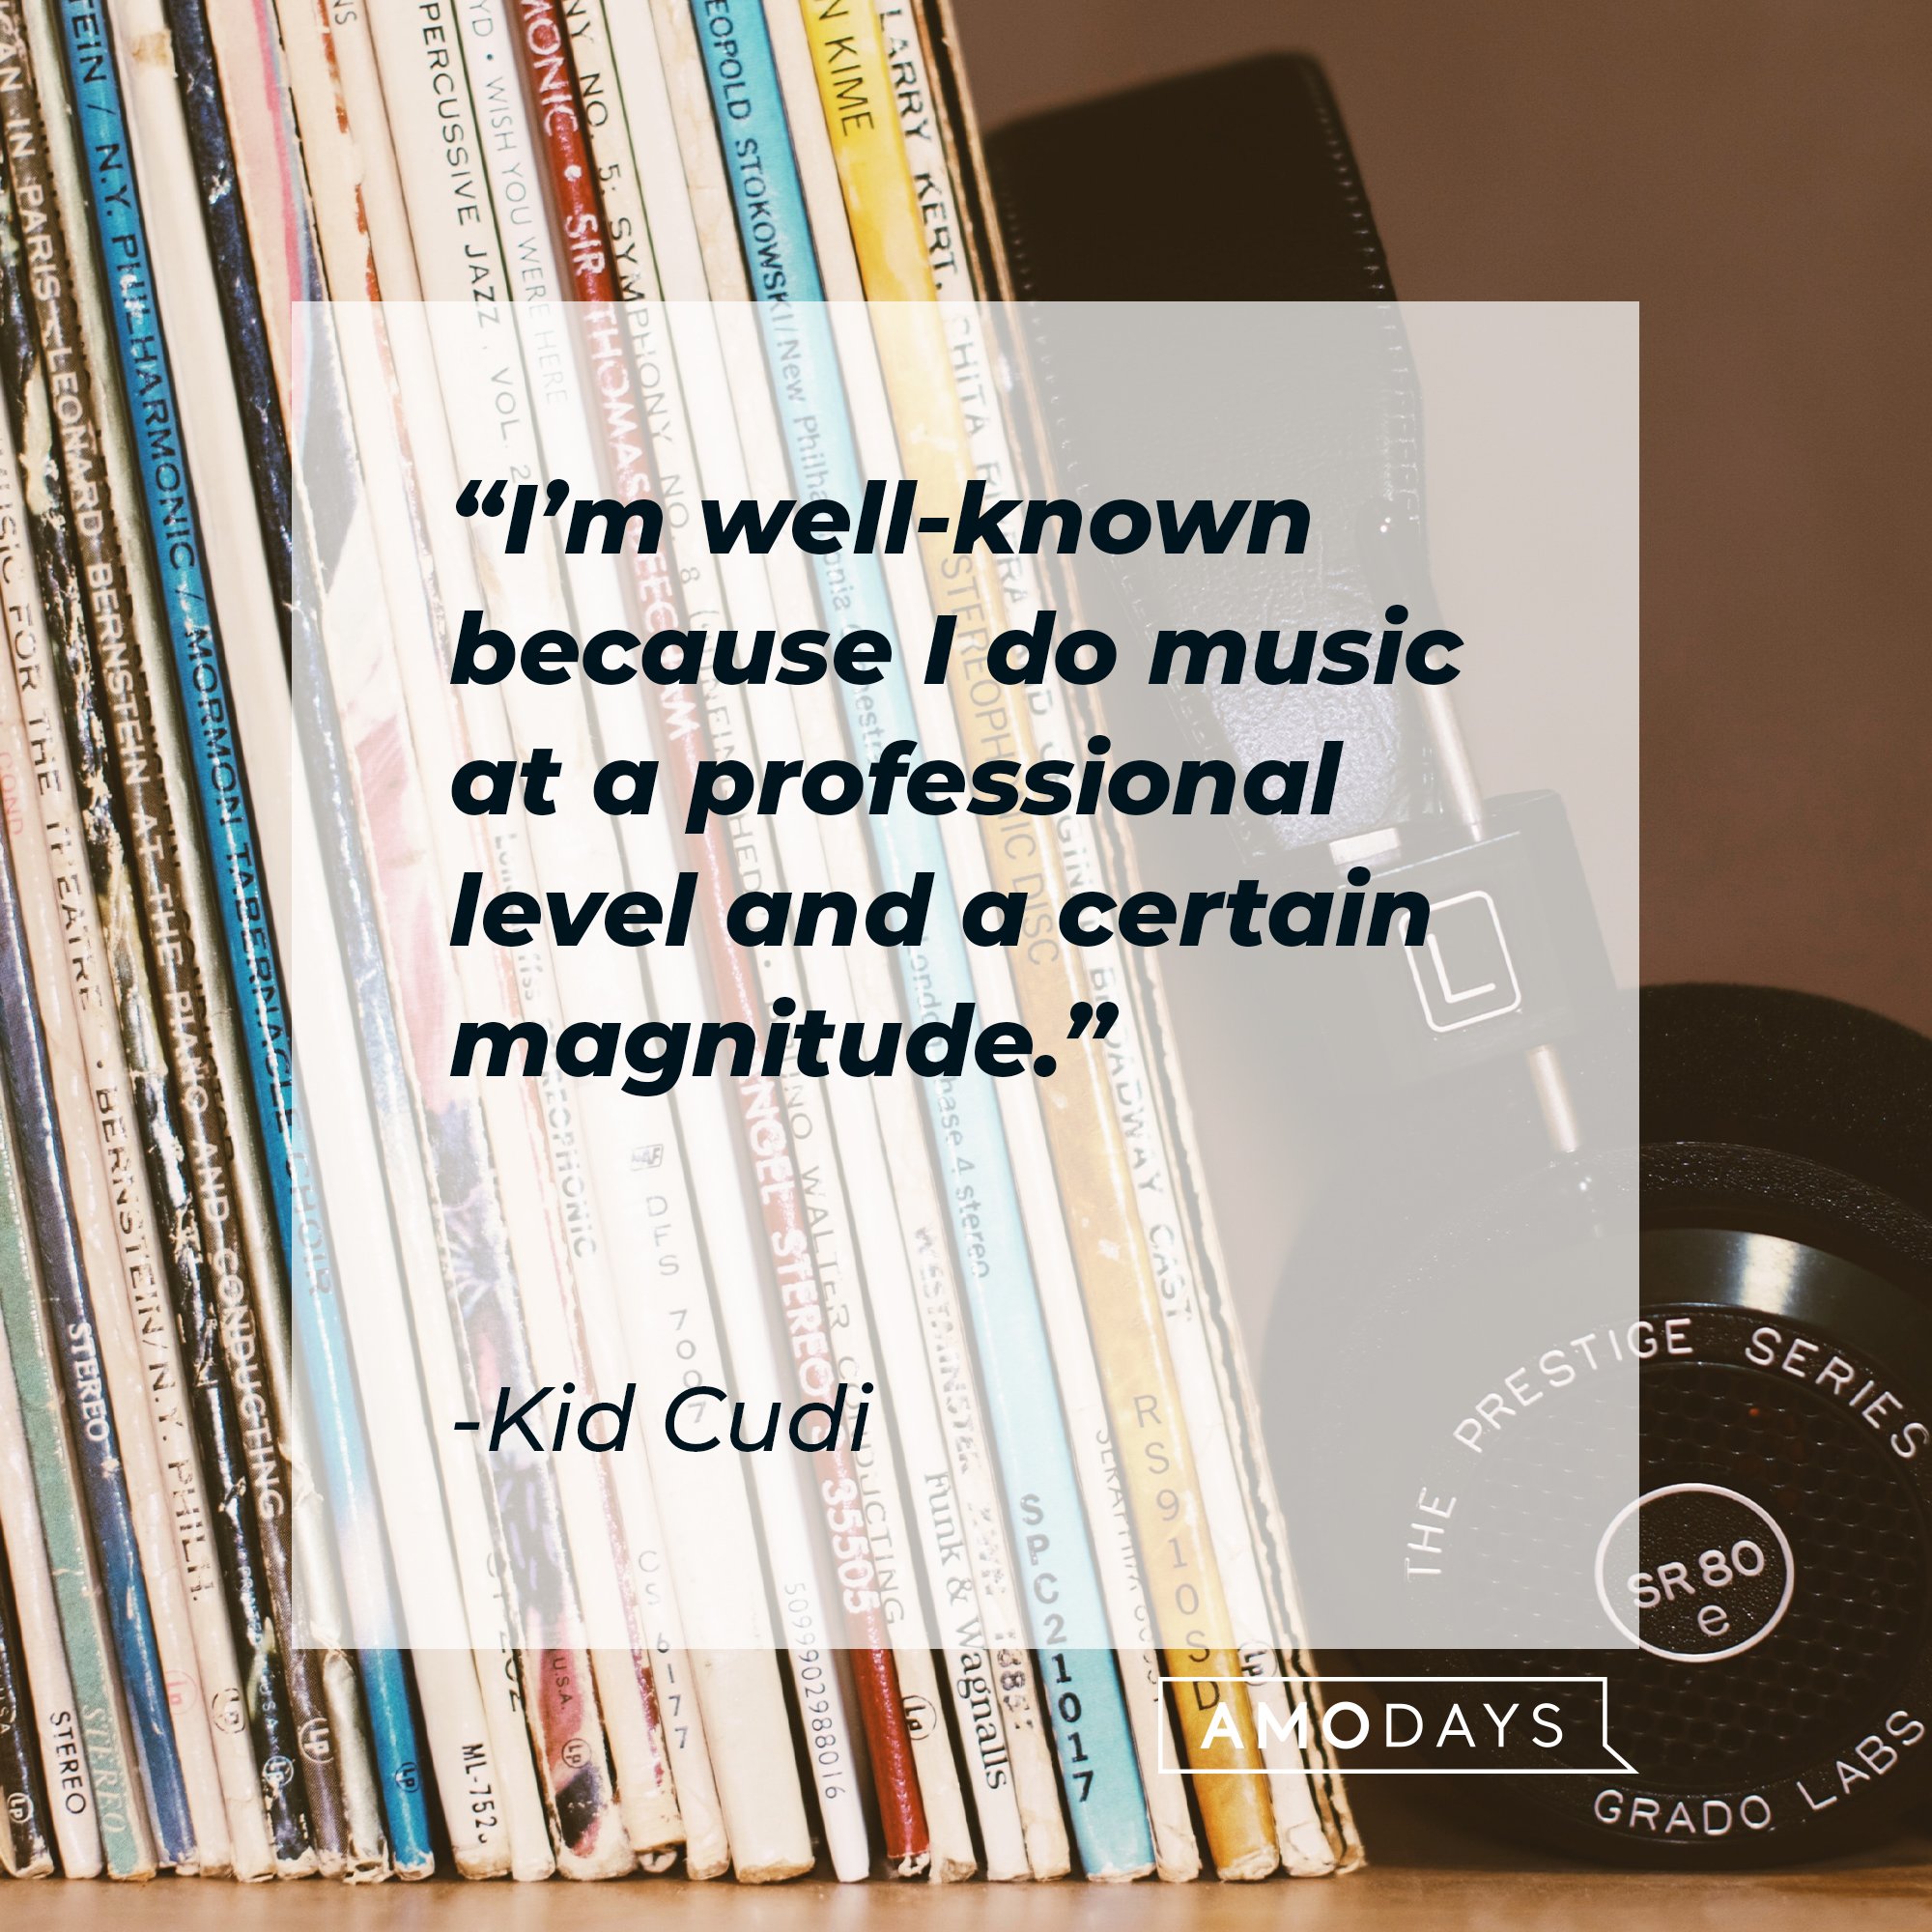 Kid Cudi’s quote: “I’m well-known because I do music at a professional level and a certain magnitude.” | Image: AmoDays